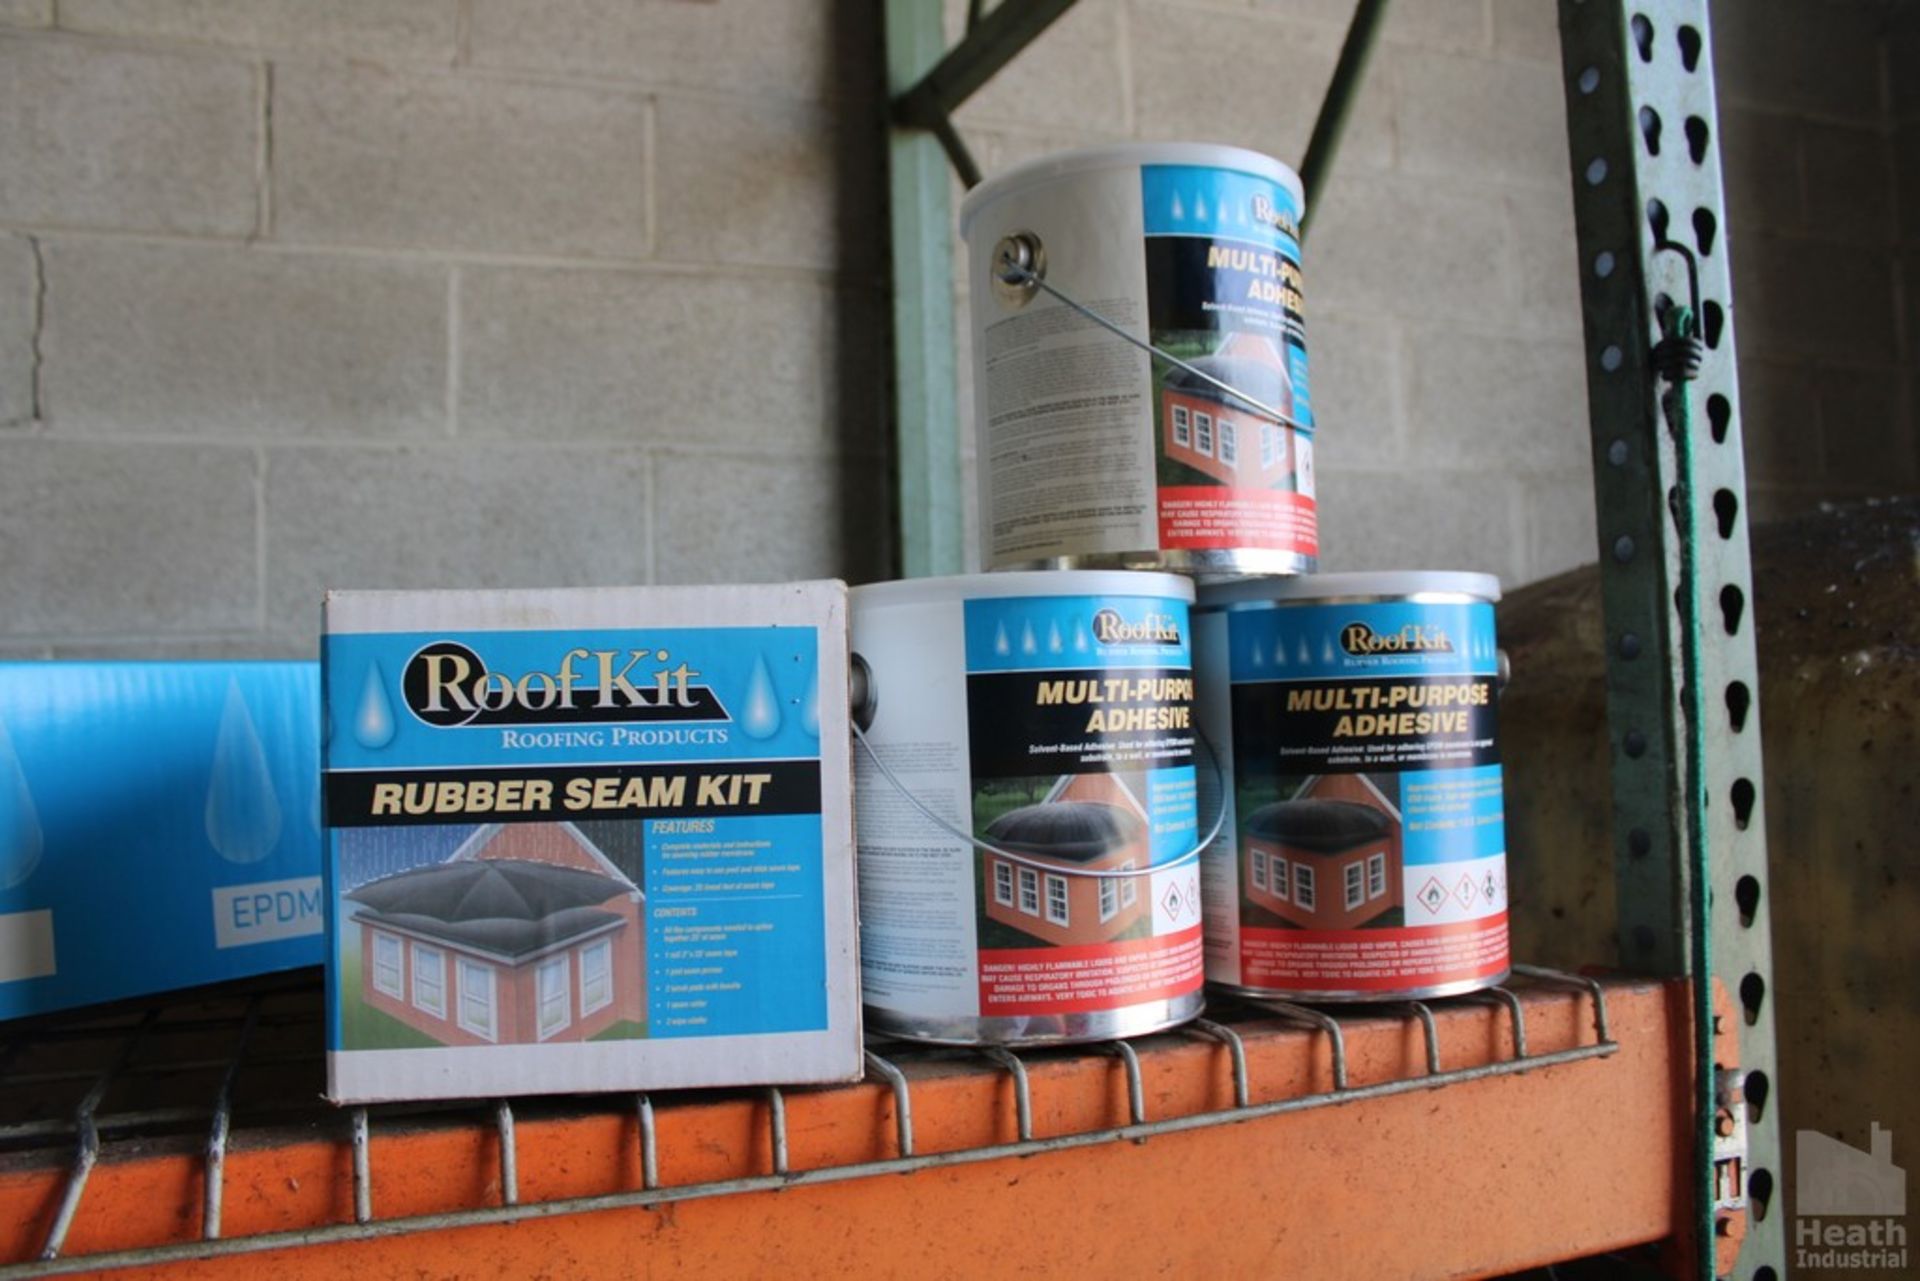 ROOF KIT EPDM RUBBER ROOFING MEMBRANE 45 MIL BLACK WITH ADHESIVE AND SEALANT - Image 2 of 2